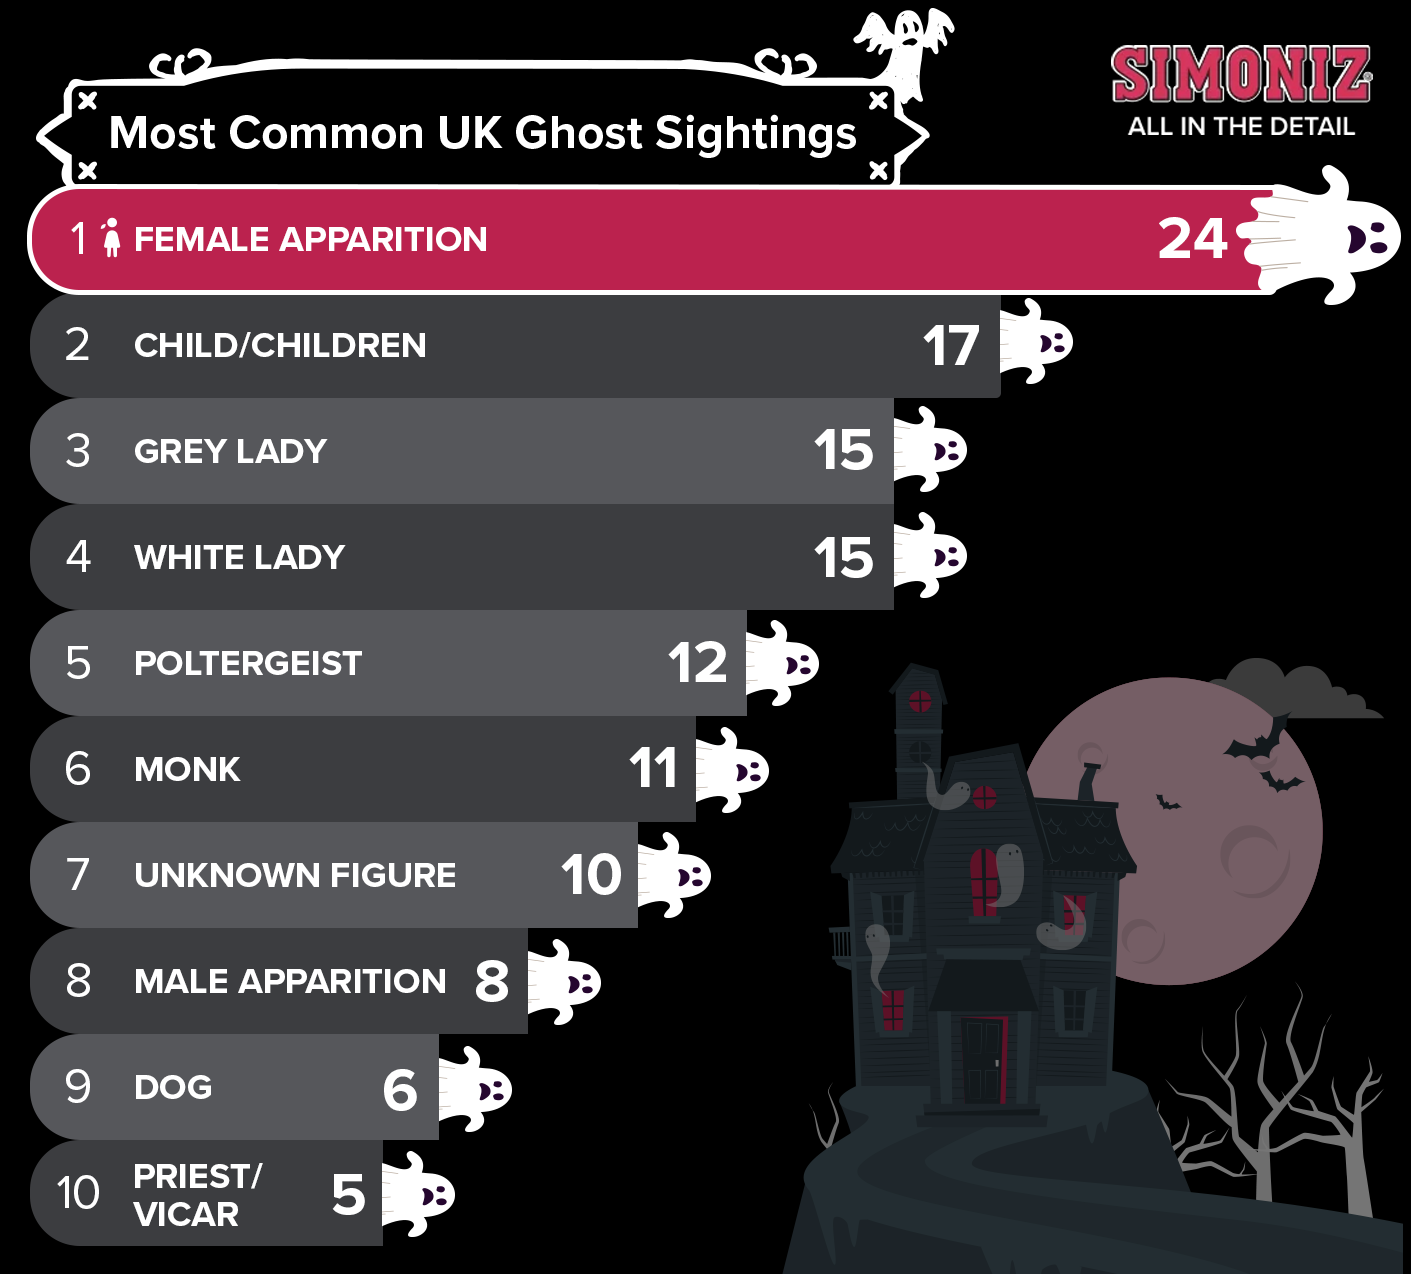 Most common UK ghost sightings